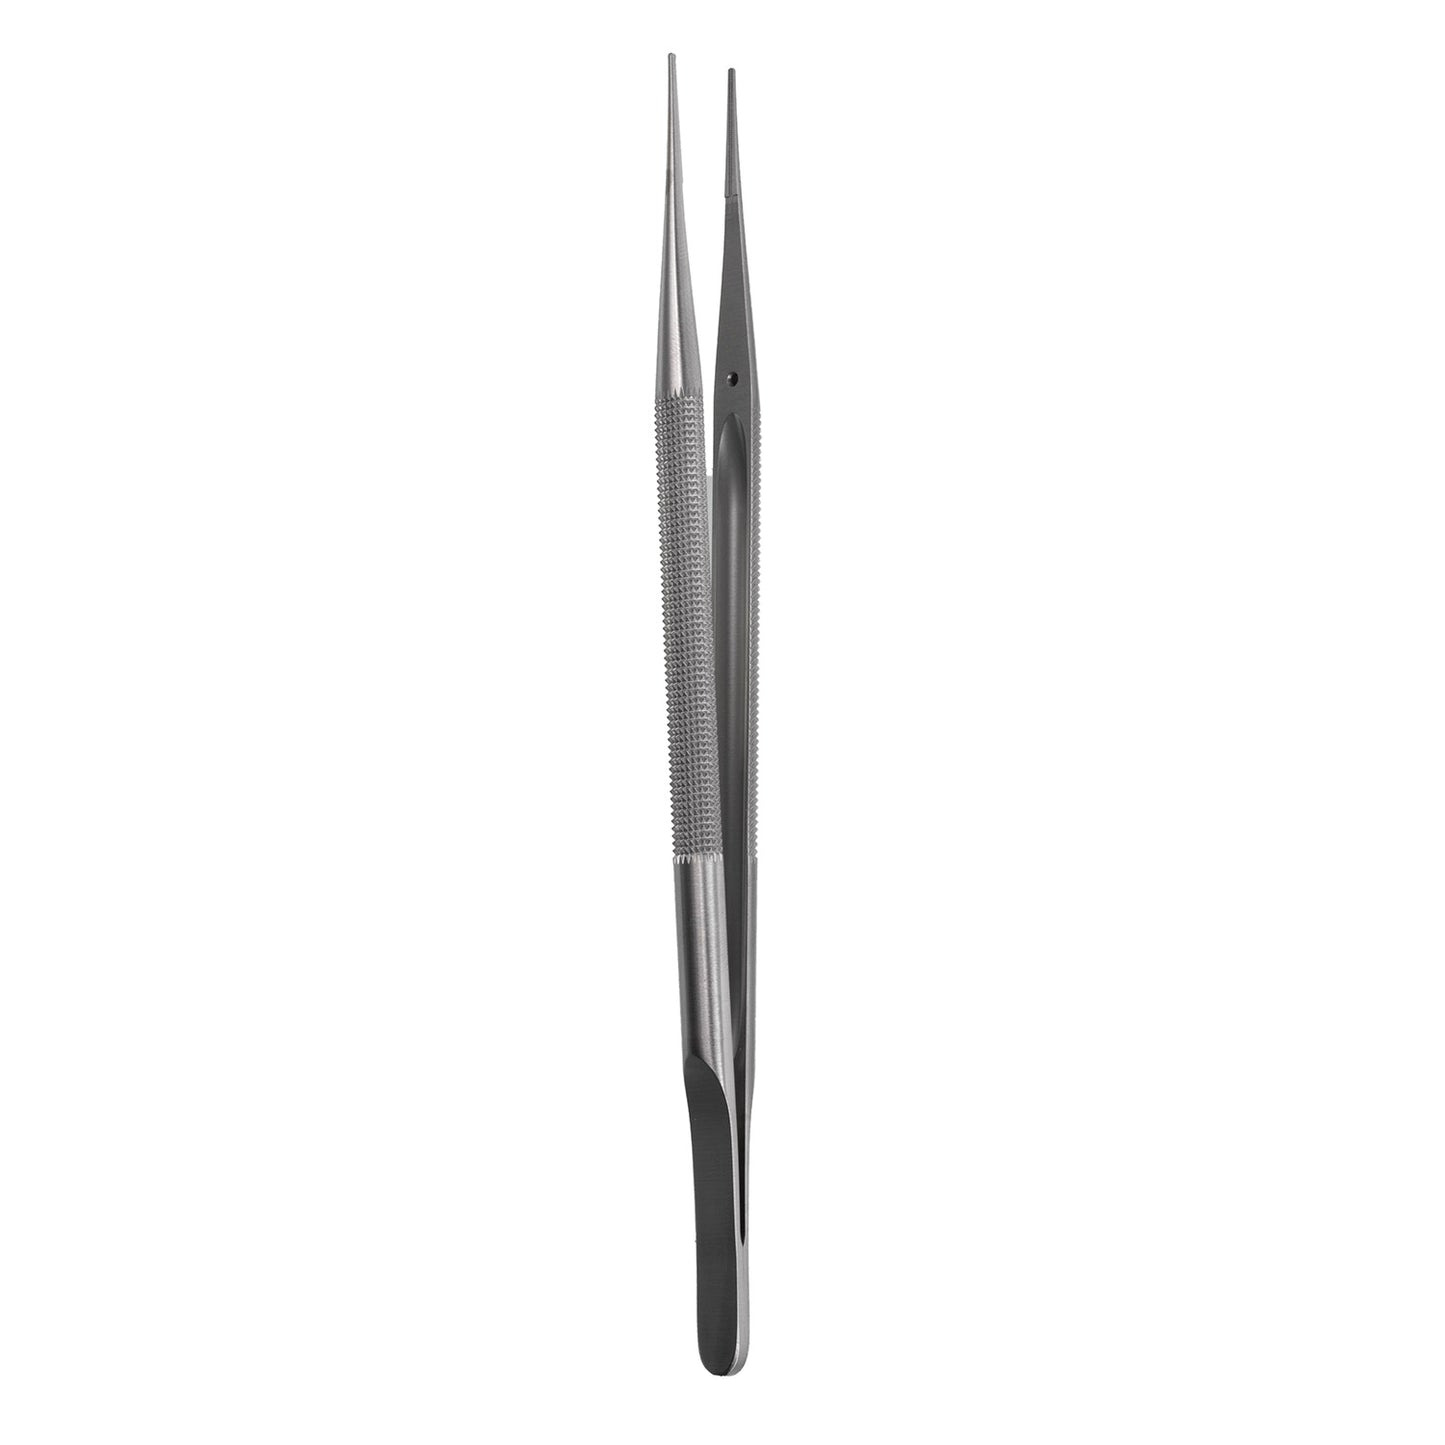 Debakey Dissector Forceps (8mm round handle, 1mm tips, 7 1/4 inch)